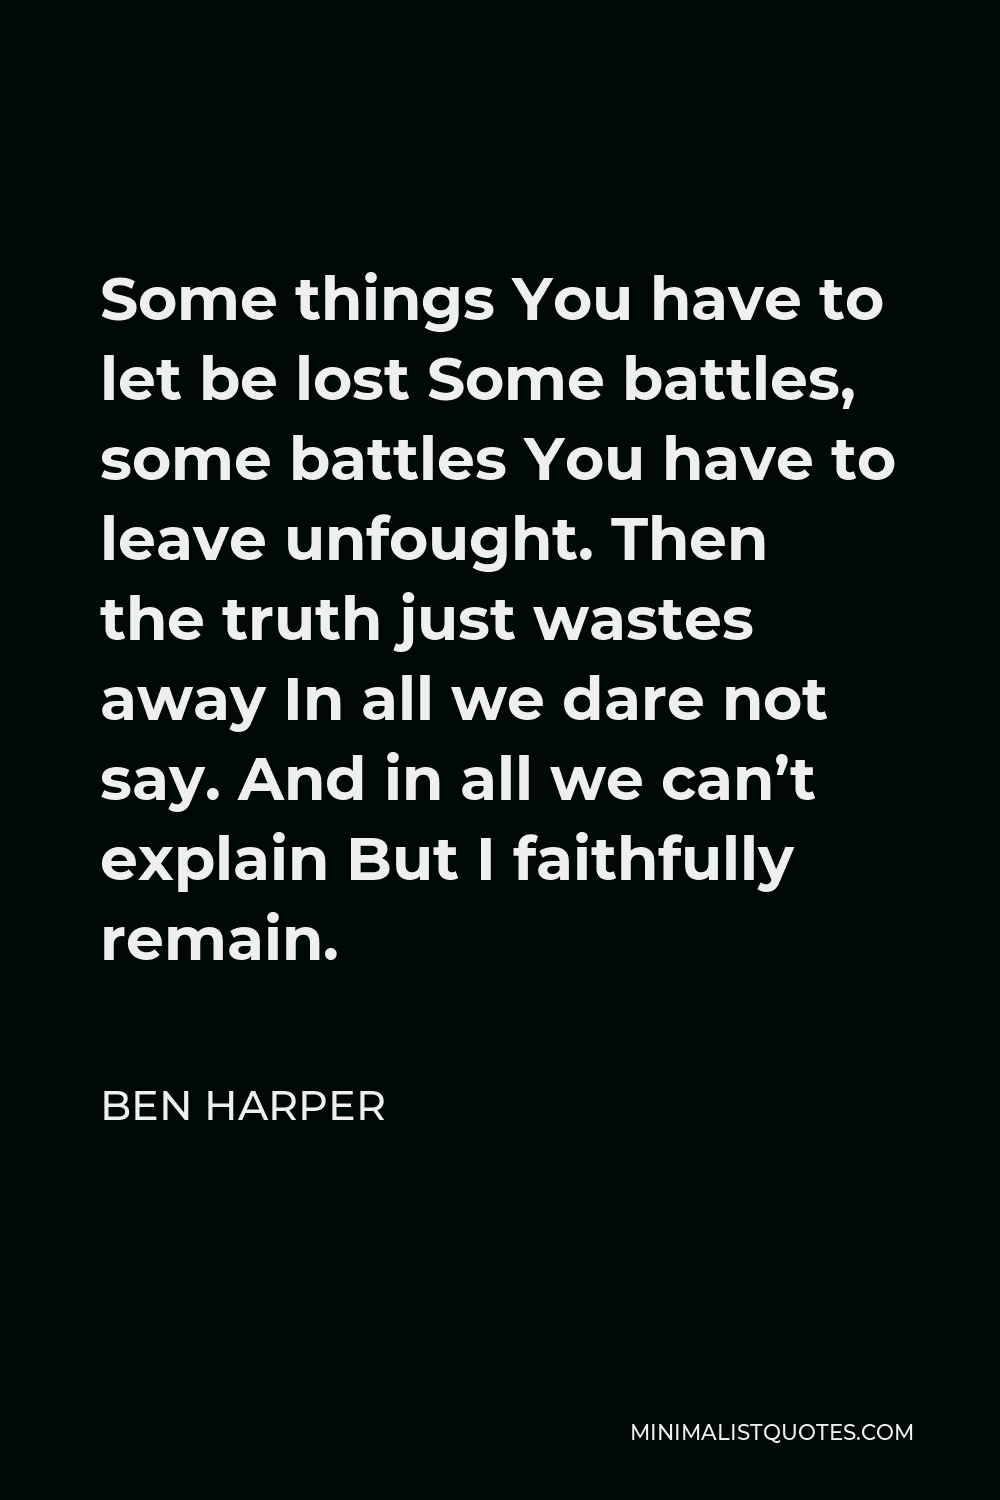 Ben Harper Quote - Some things You have to let be lost Some battles, some battles You have to leave unfought. Then the truth just wastes away In all we dare not say. And in all we can’t explain But I faithfully remain.